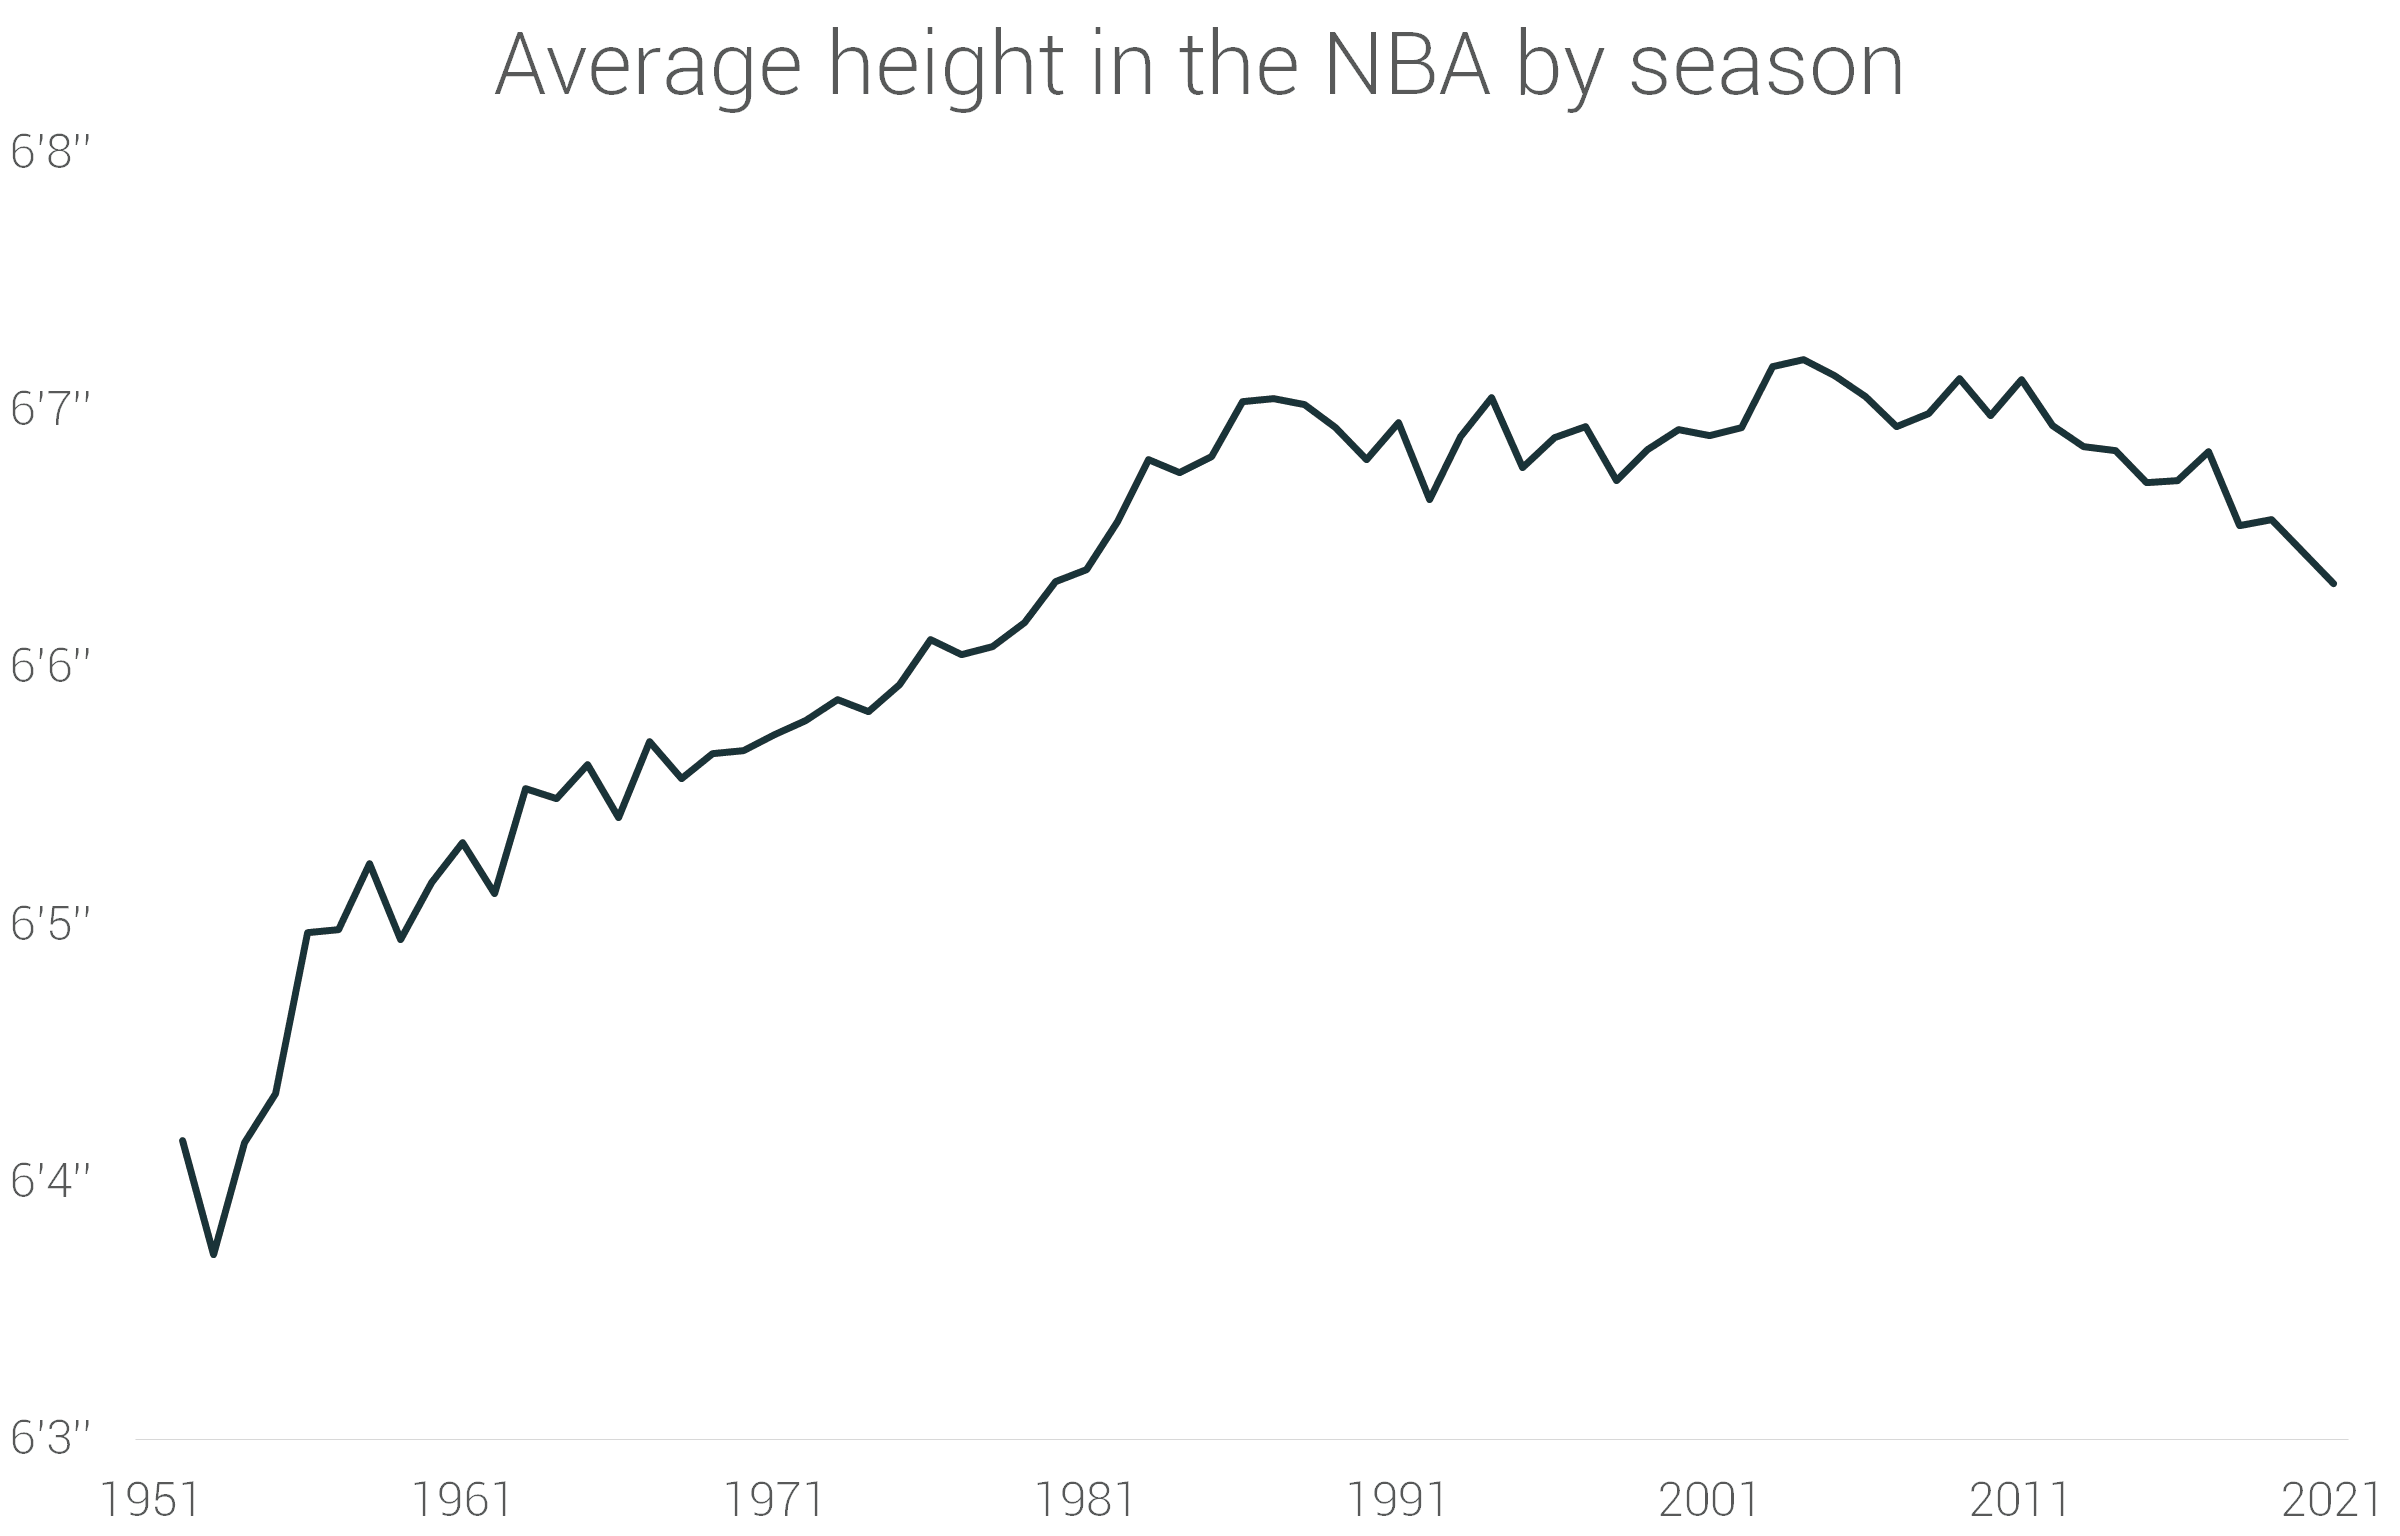 https://cdn.runrepeat.com/storage/uploads/research/Basketball/NBA%20Height%20Evolution/Average%20height%20in%20the%20NBA.png